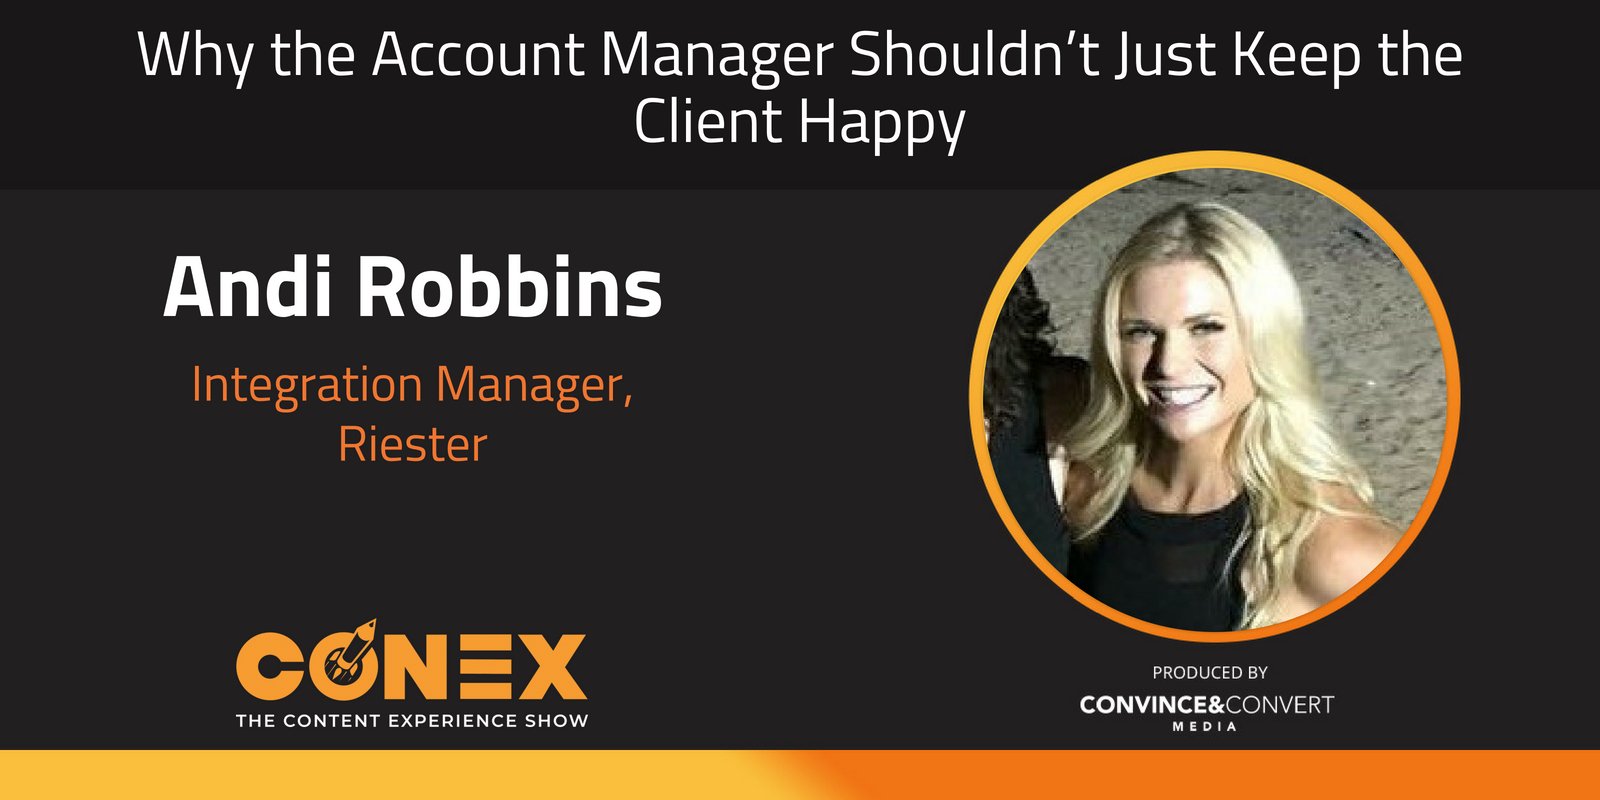 Why the Account Manager Shouldn’t Just Keep the Client Happy